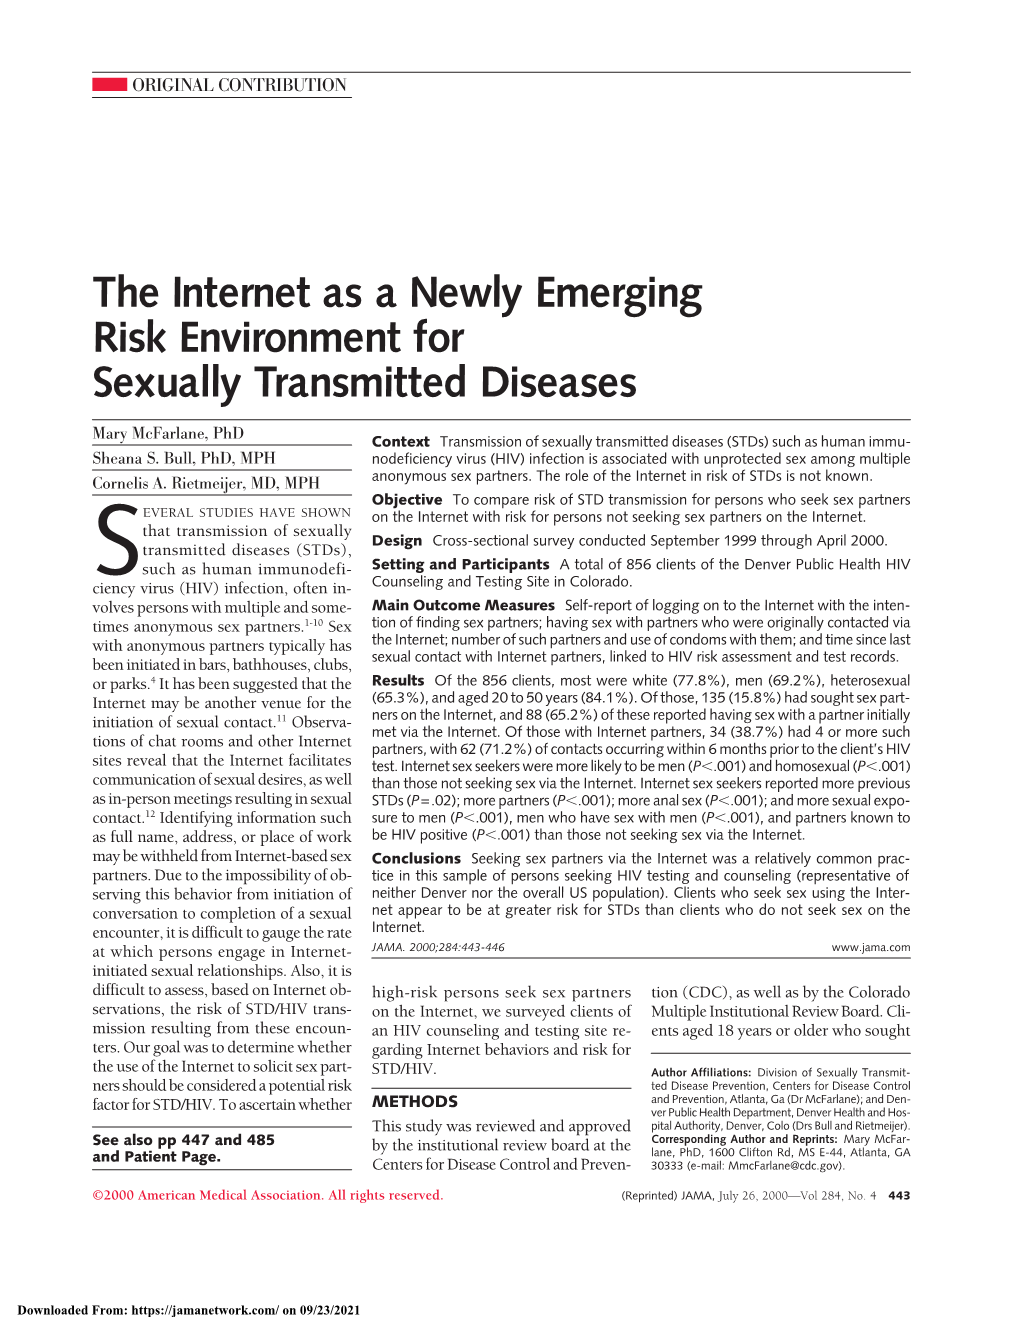 The Internet As a Newly Emerging Risk Environment for Sexually Transmitted Diseases